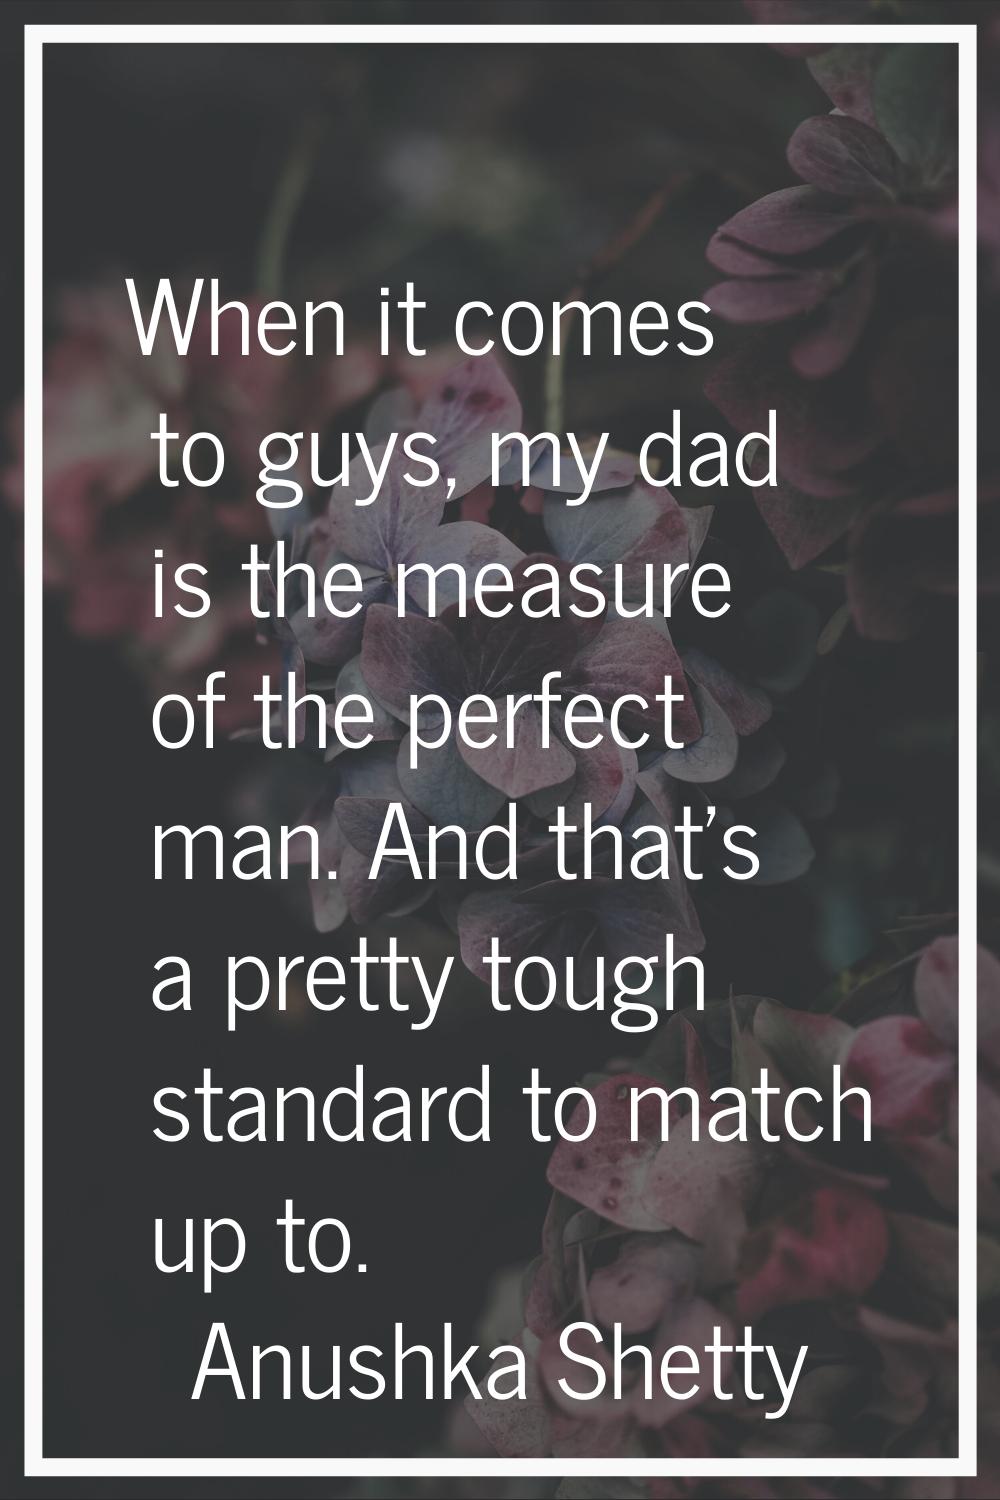 When it comes to guys, my dad is the measure of the perfect man. And that's a pretty tough standard